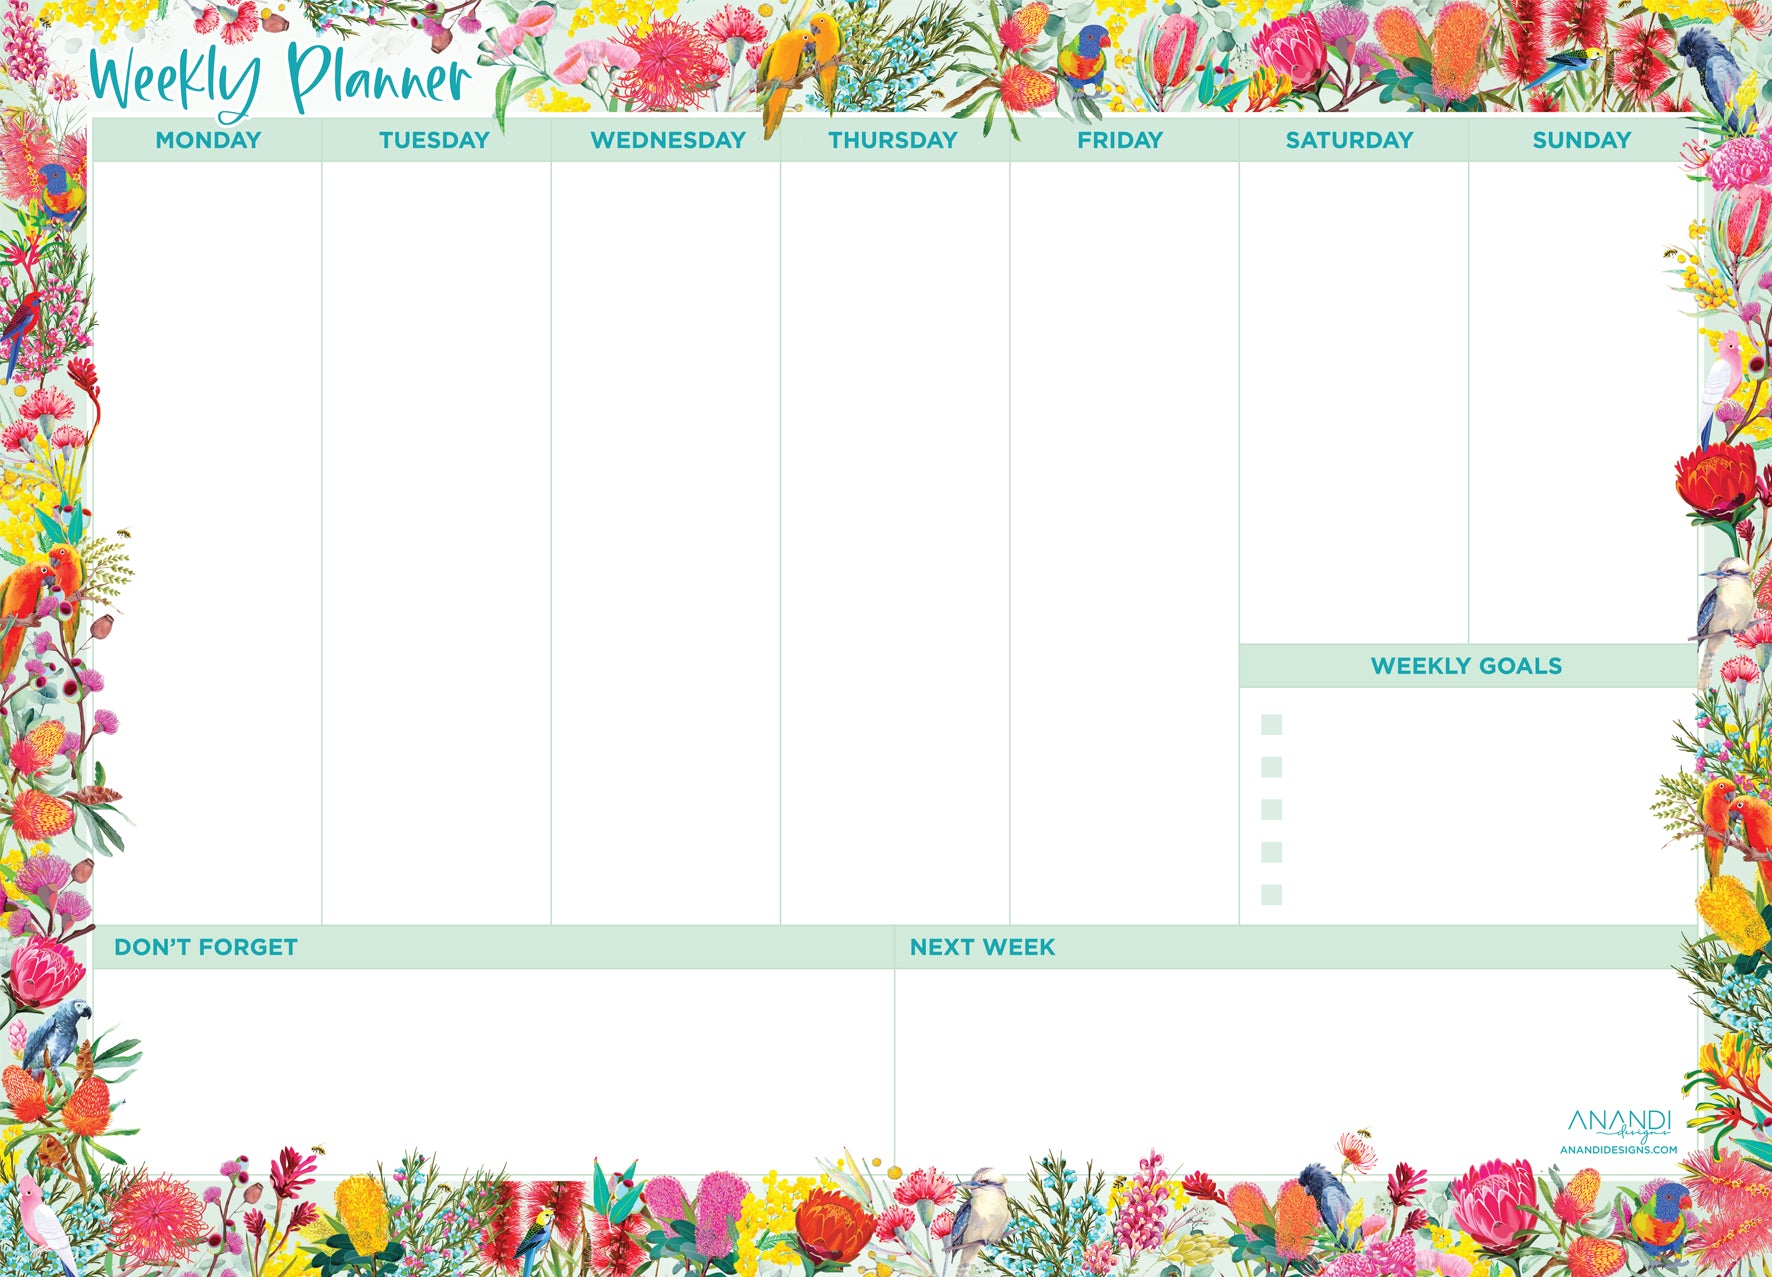 Magnetic Weekly Planner - Natives (LARGE 43cm x 31cm)